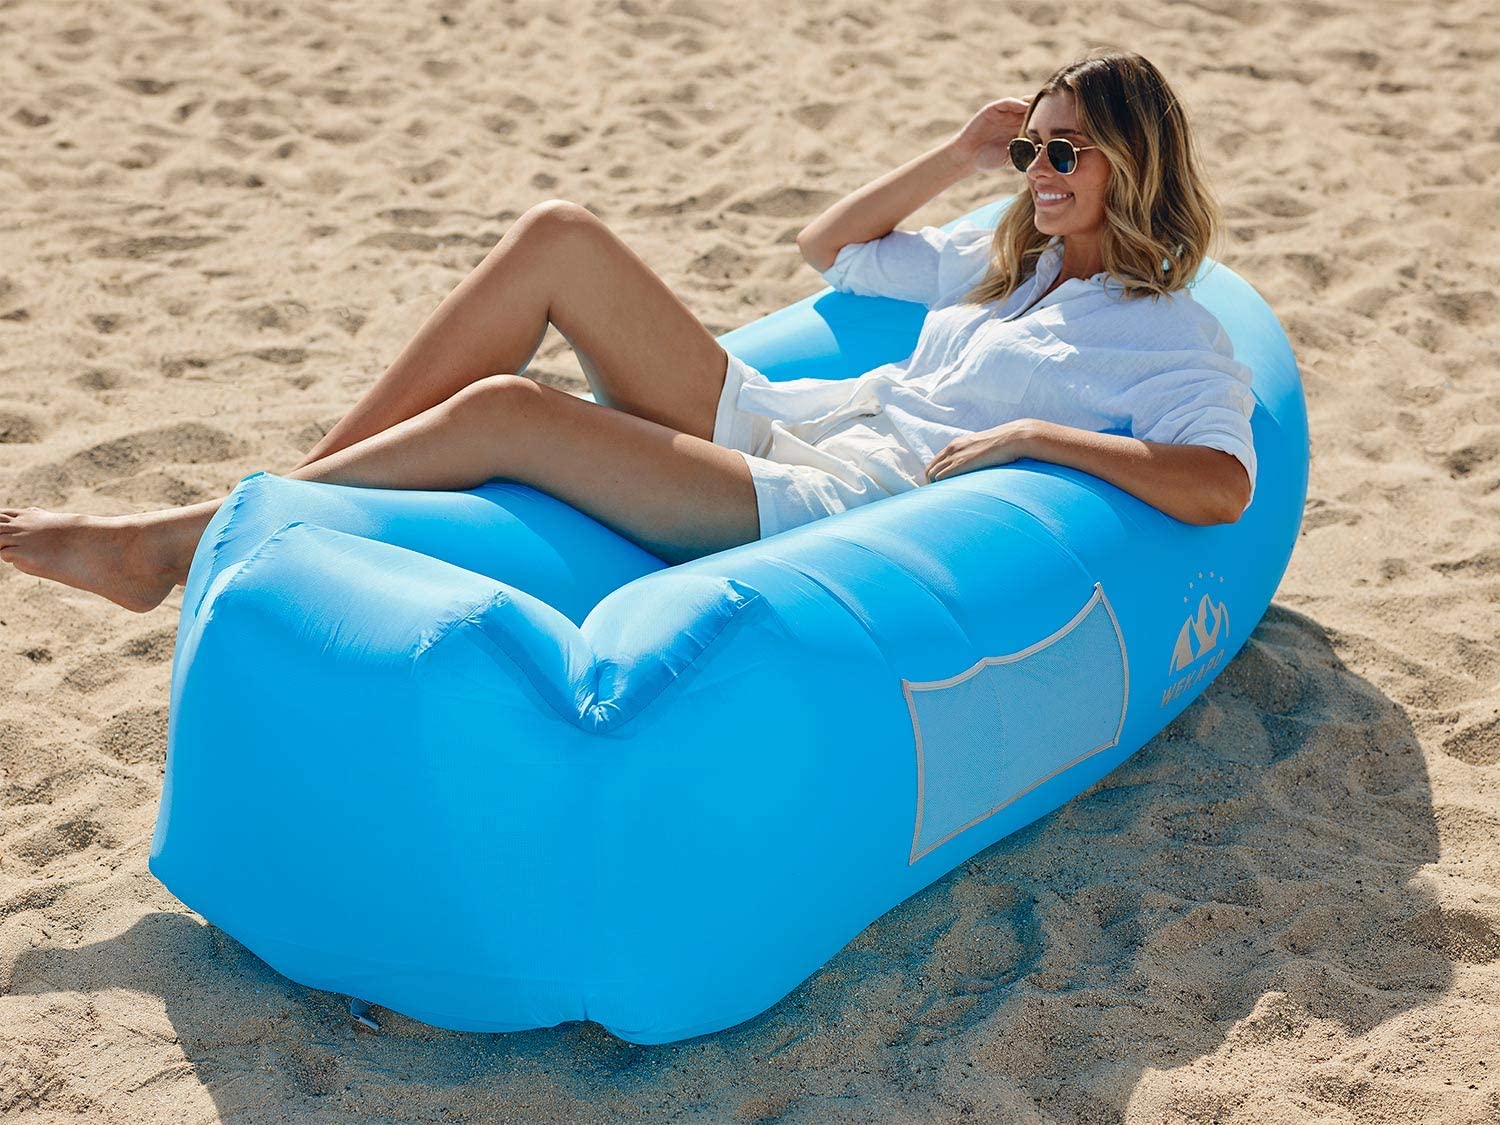 The 10 Best Inflatable Couches for Camping & Outdoors [2022]